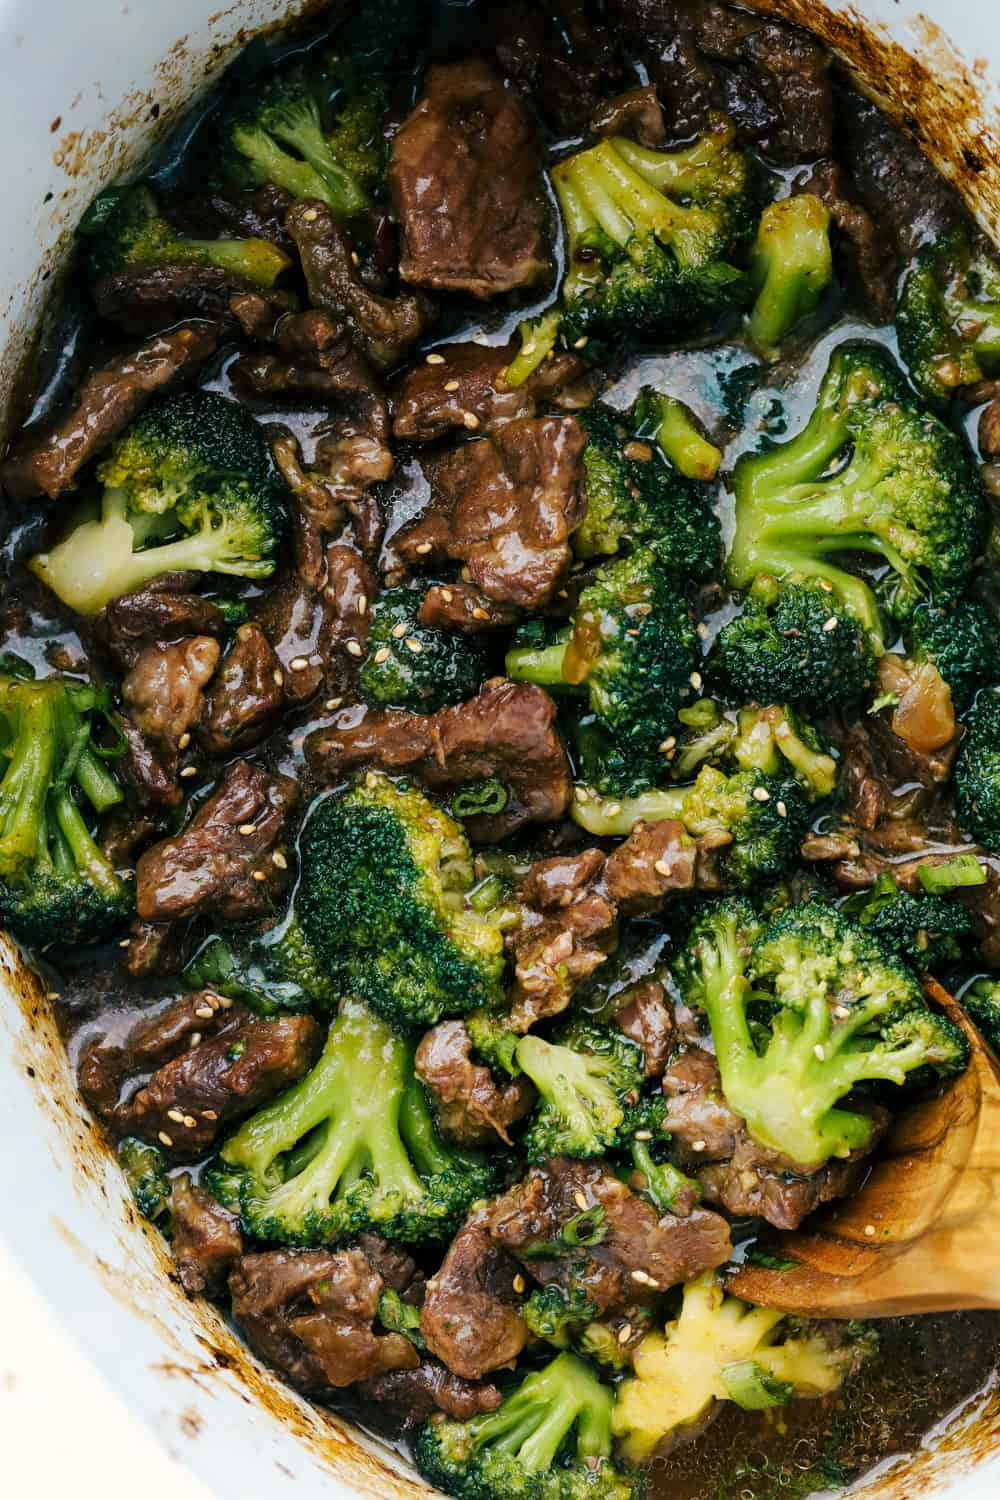 Beef and broccoli in a slow cooker.